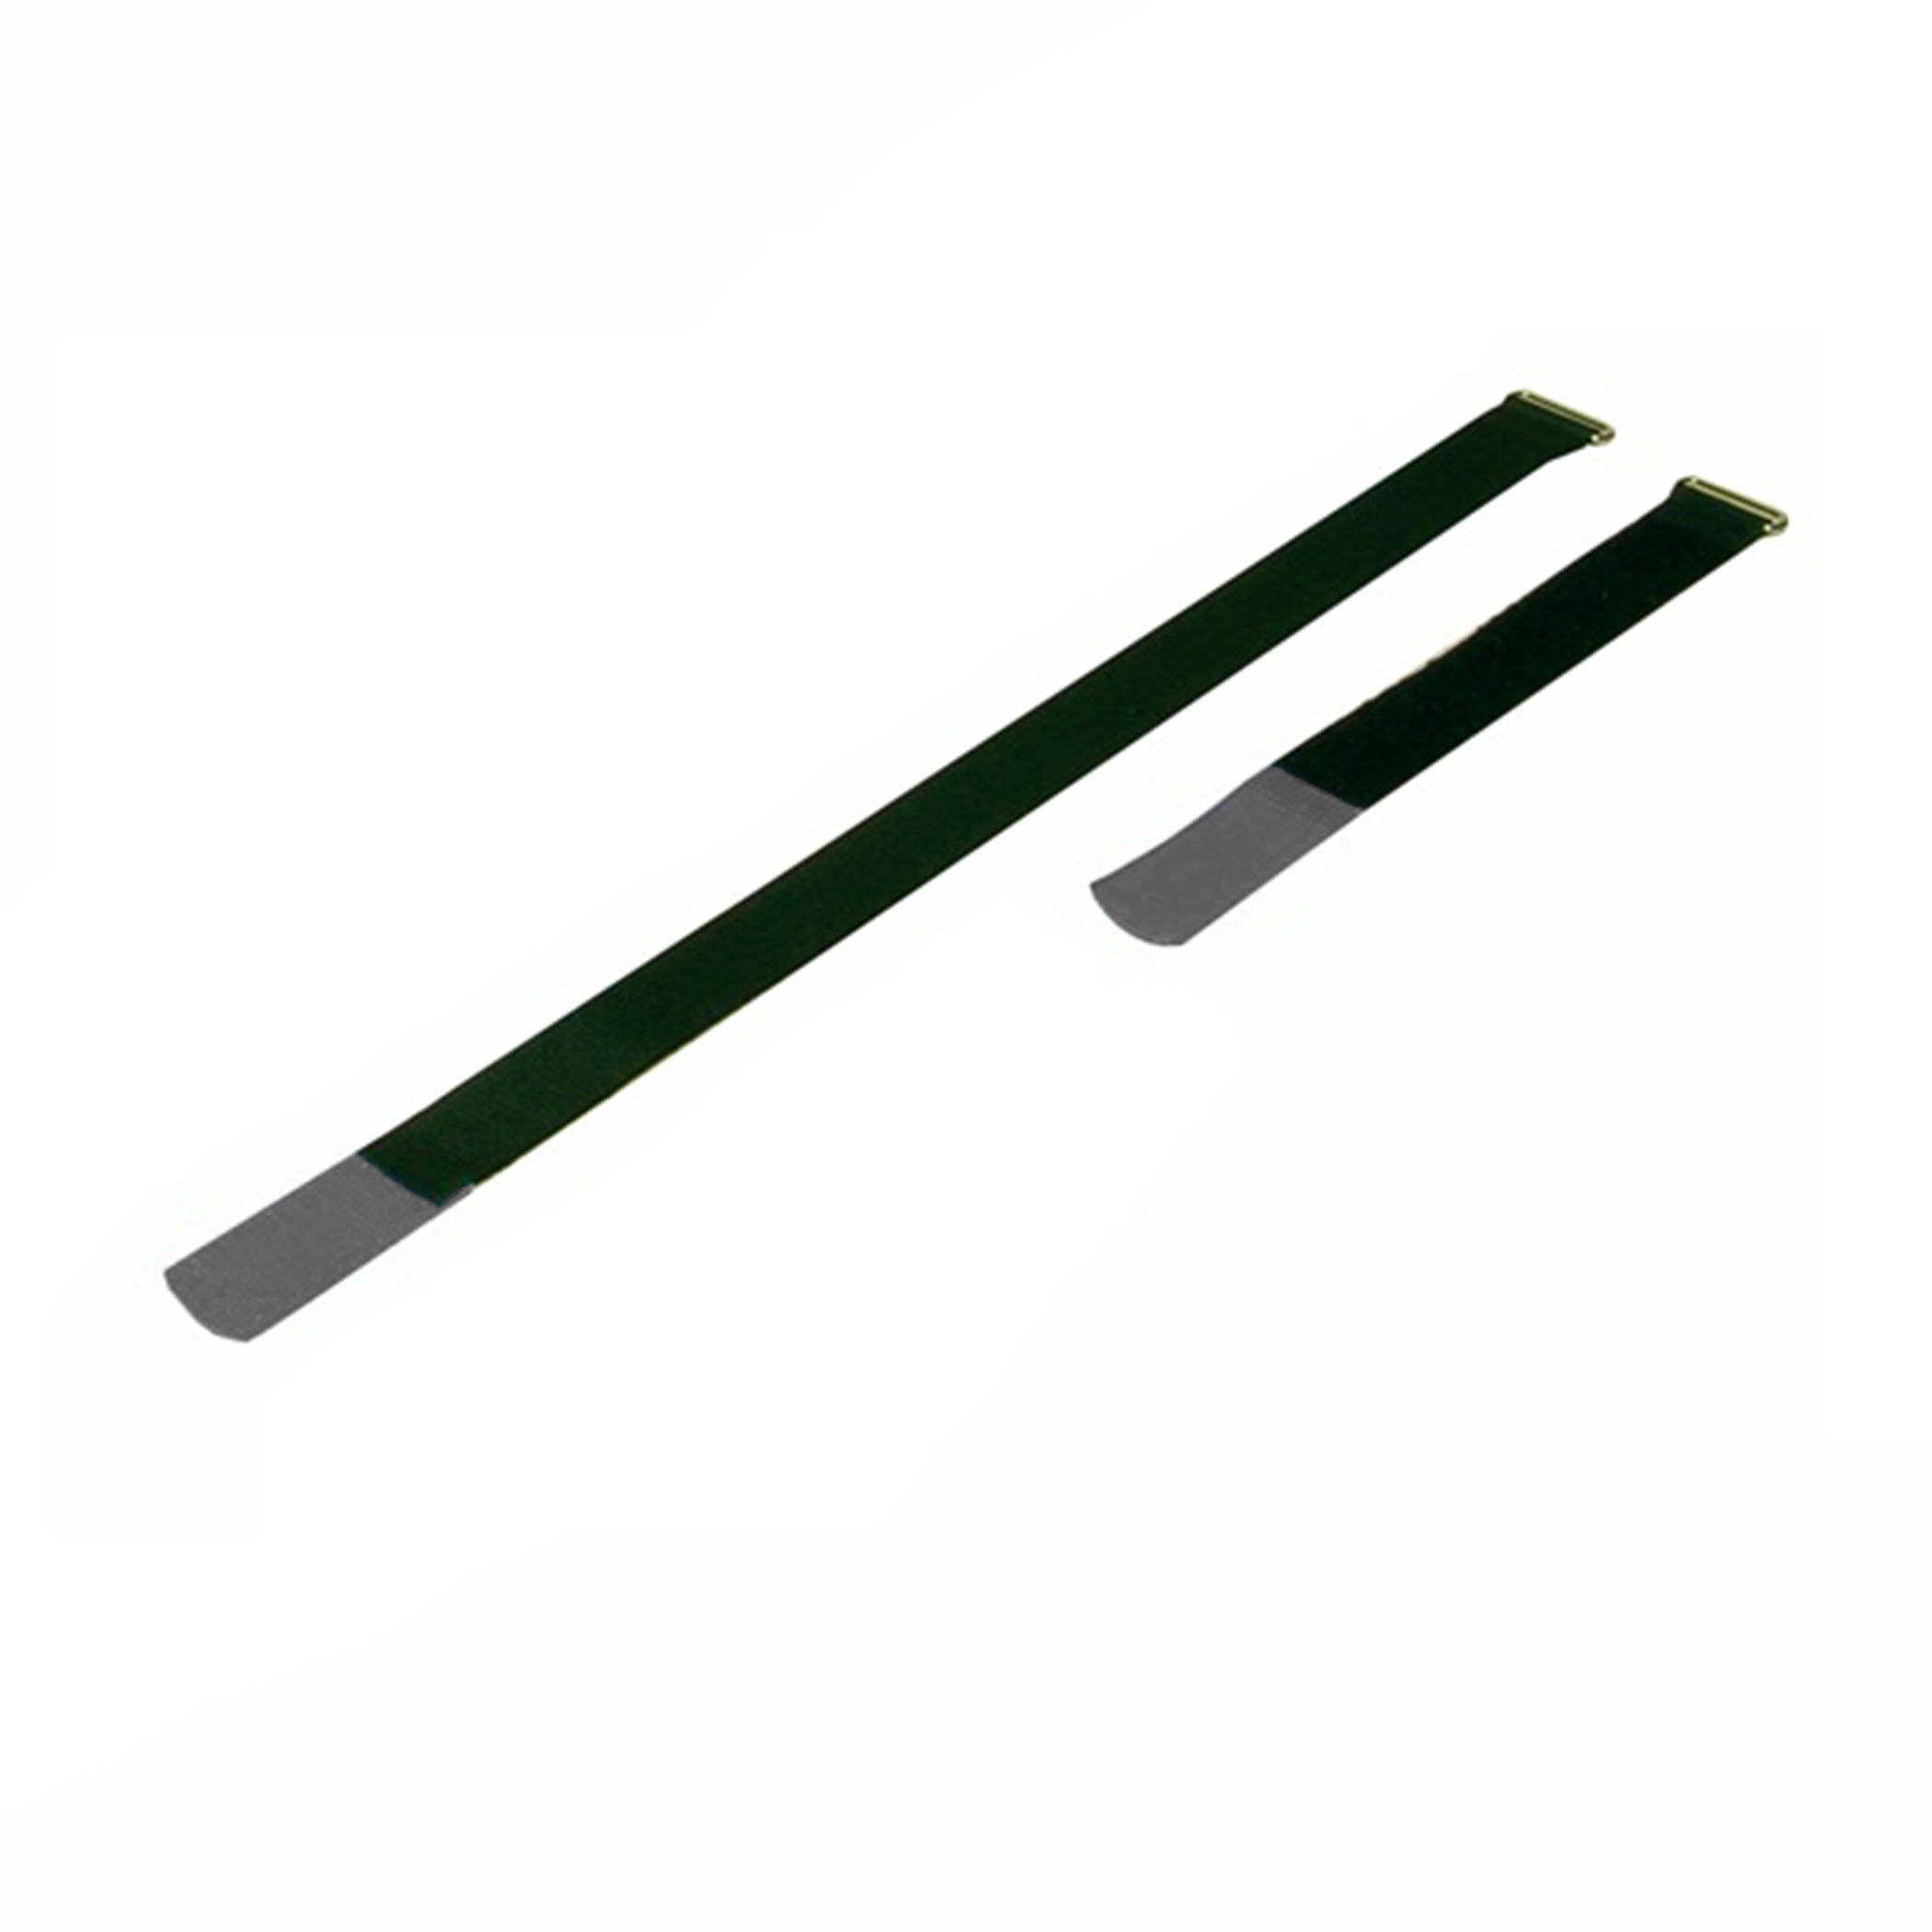 Cable Tie 170x25mm with Hook Gray, (10 pieces) - a2517-520h